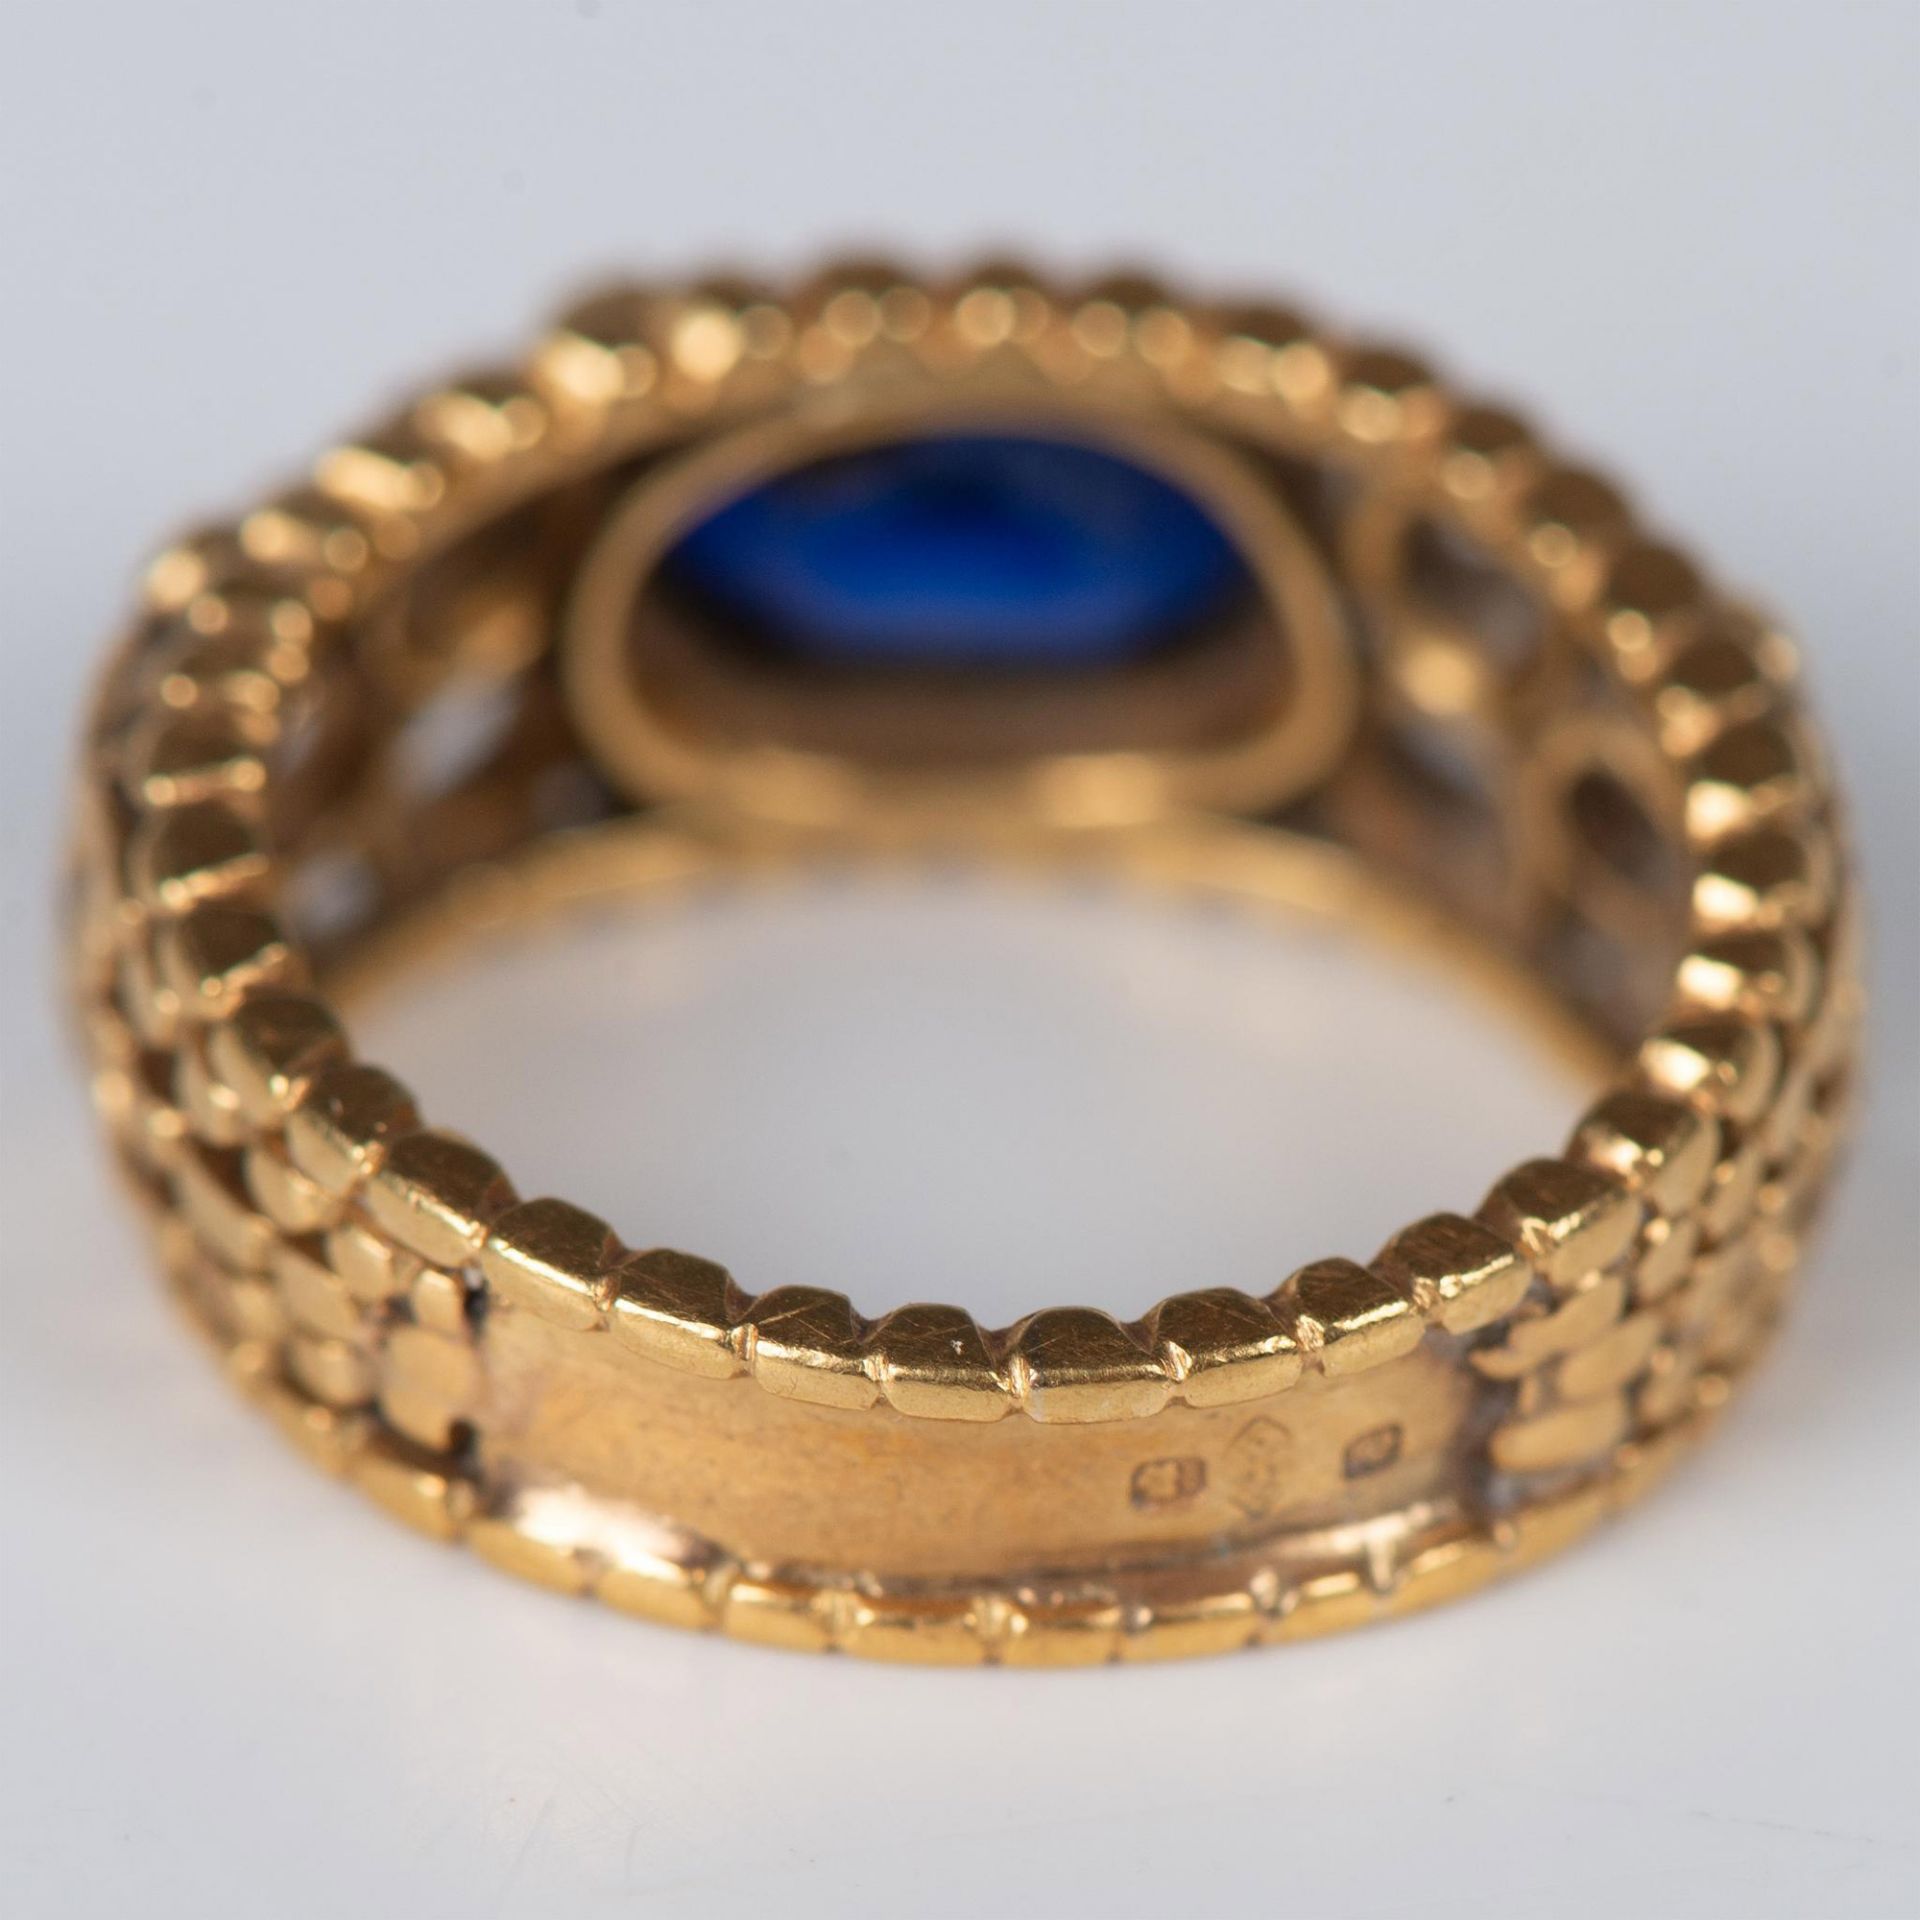 Antique 19th c. 20K Gold and Natural Sapphire Ring - Image 3 of 5